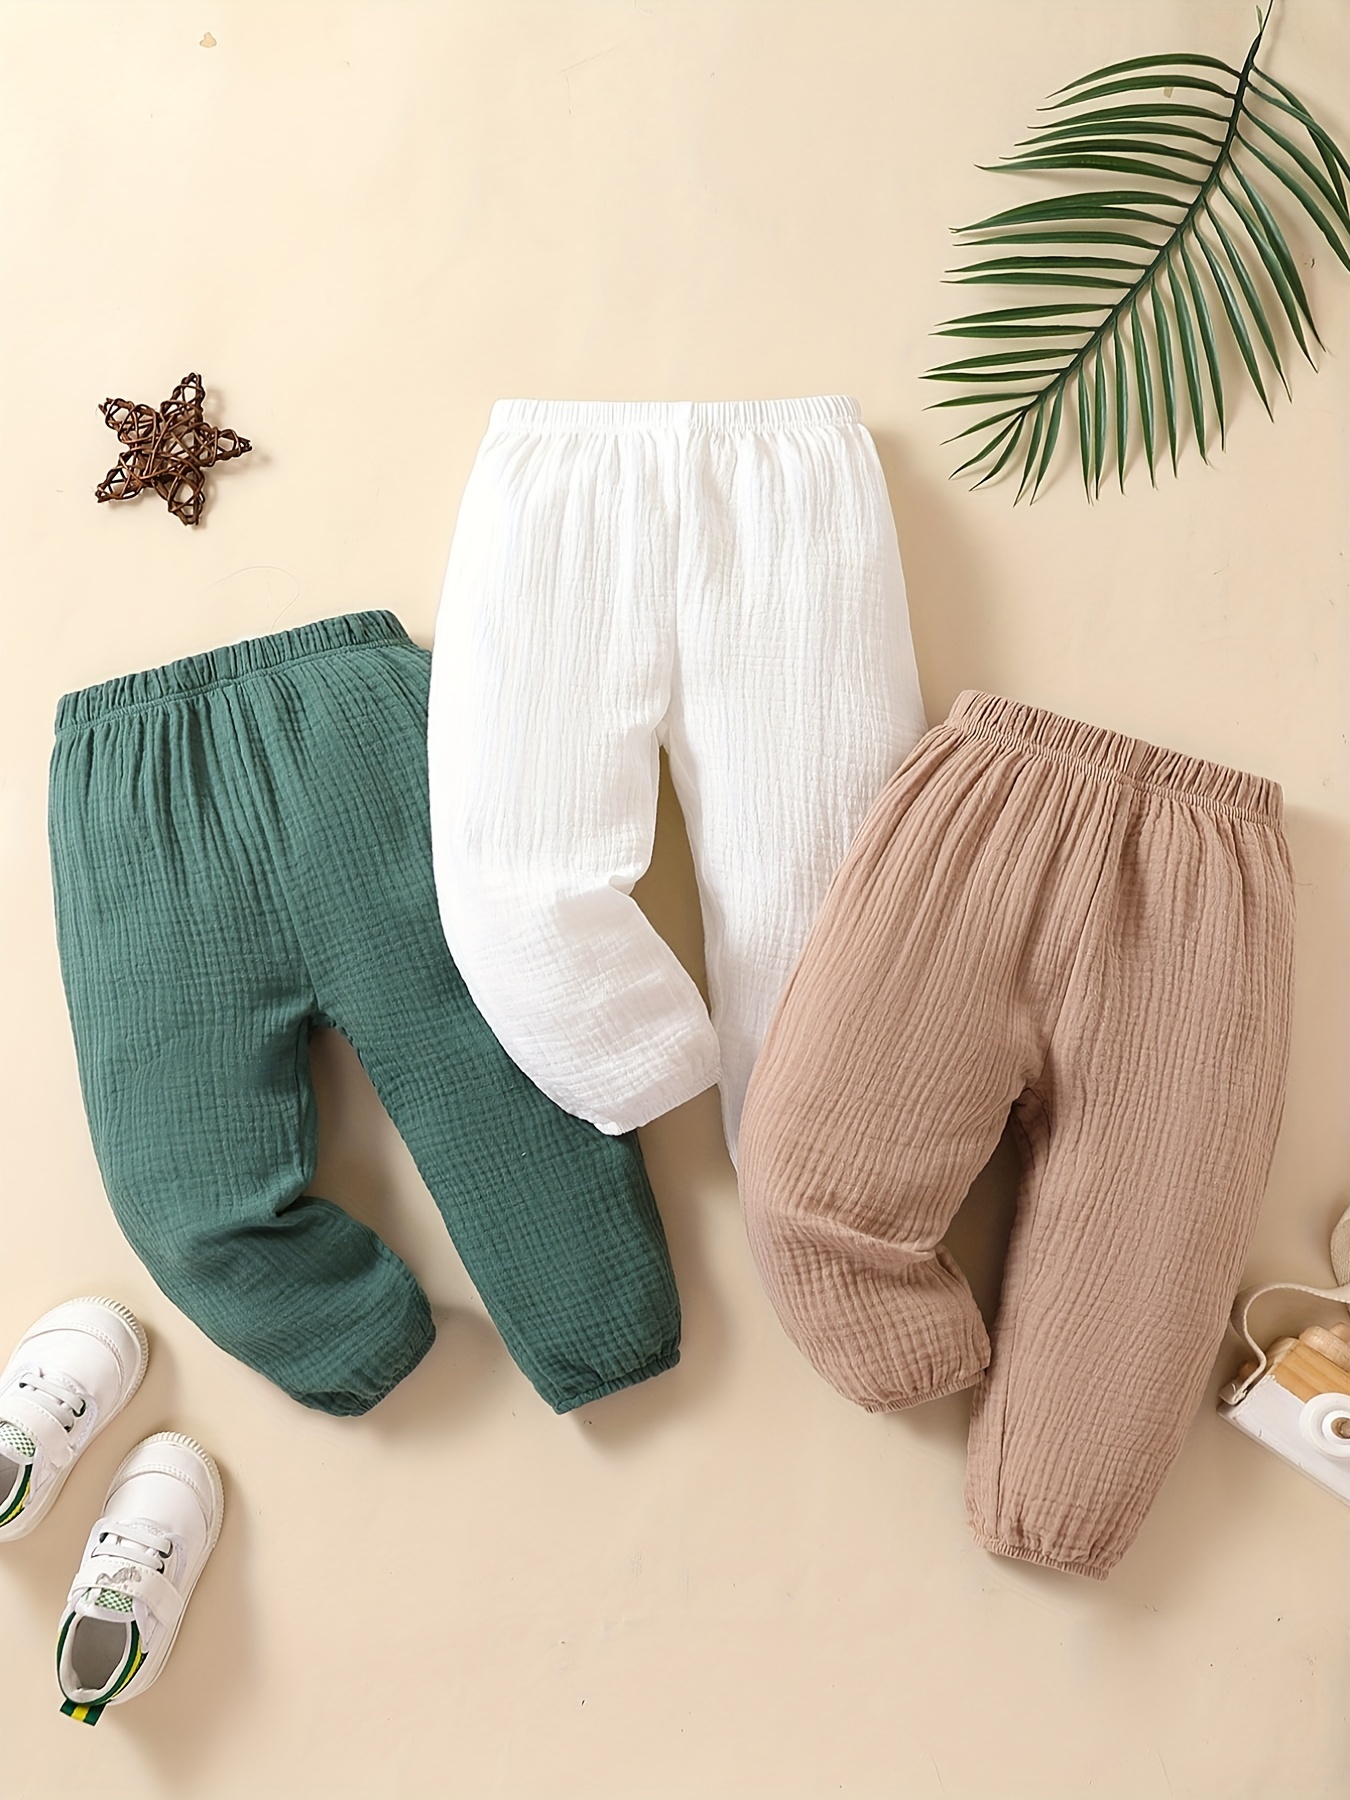 LF】Kids Long Pants Cotton Boys Bloomers Girls Solid Color Slacks Children  Casual Trousers 100-160cm for Spring Summer